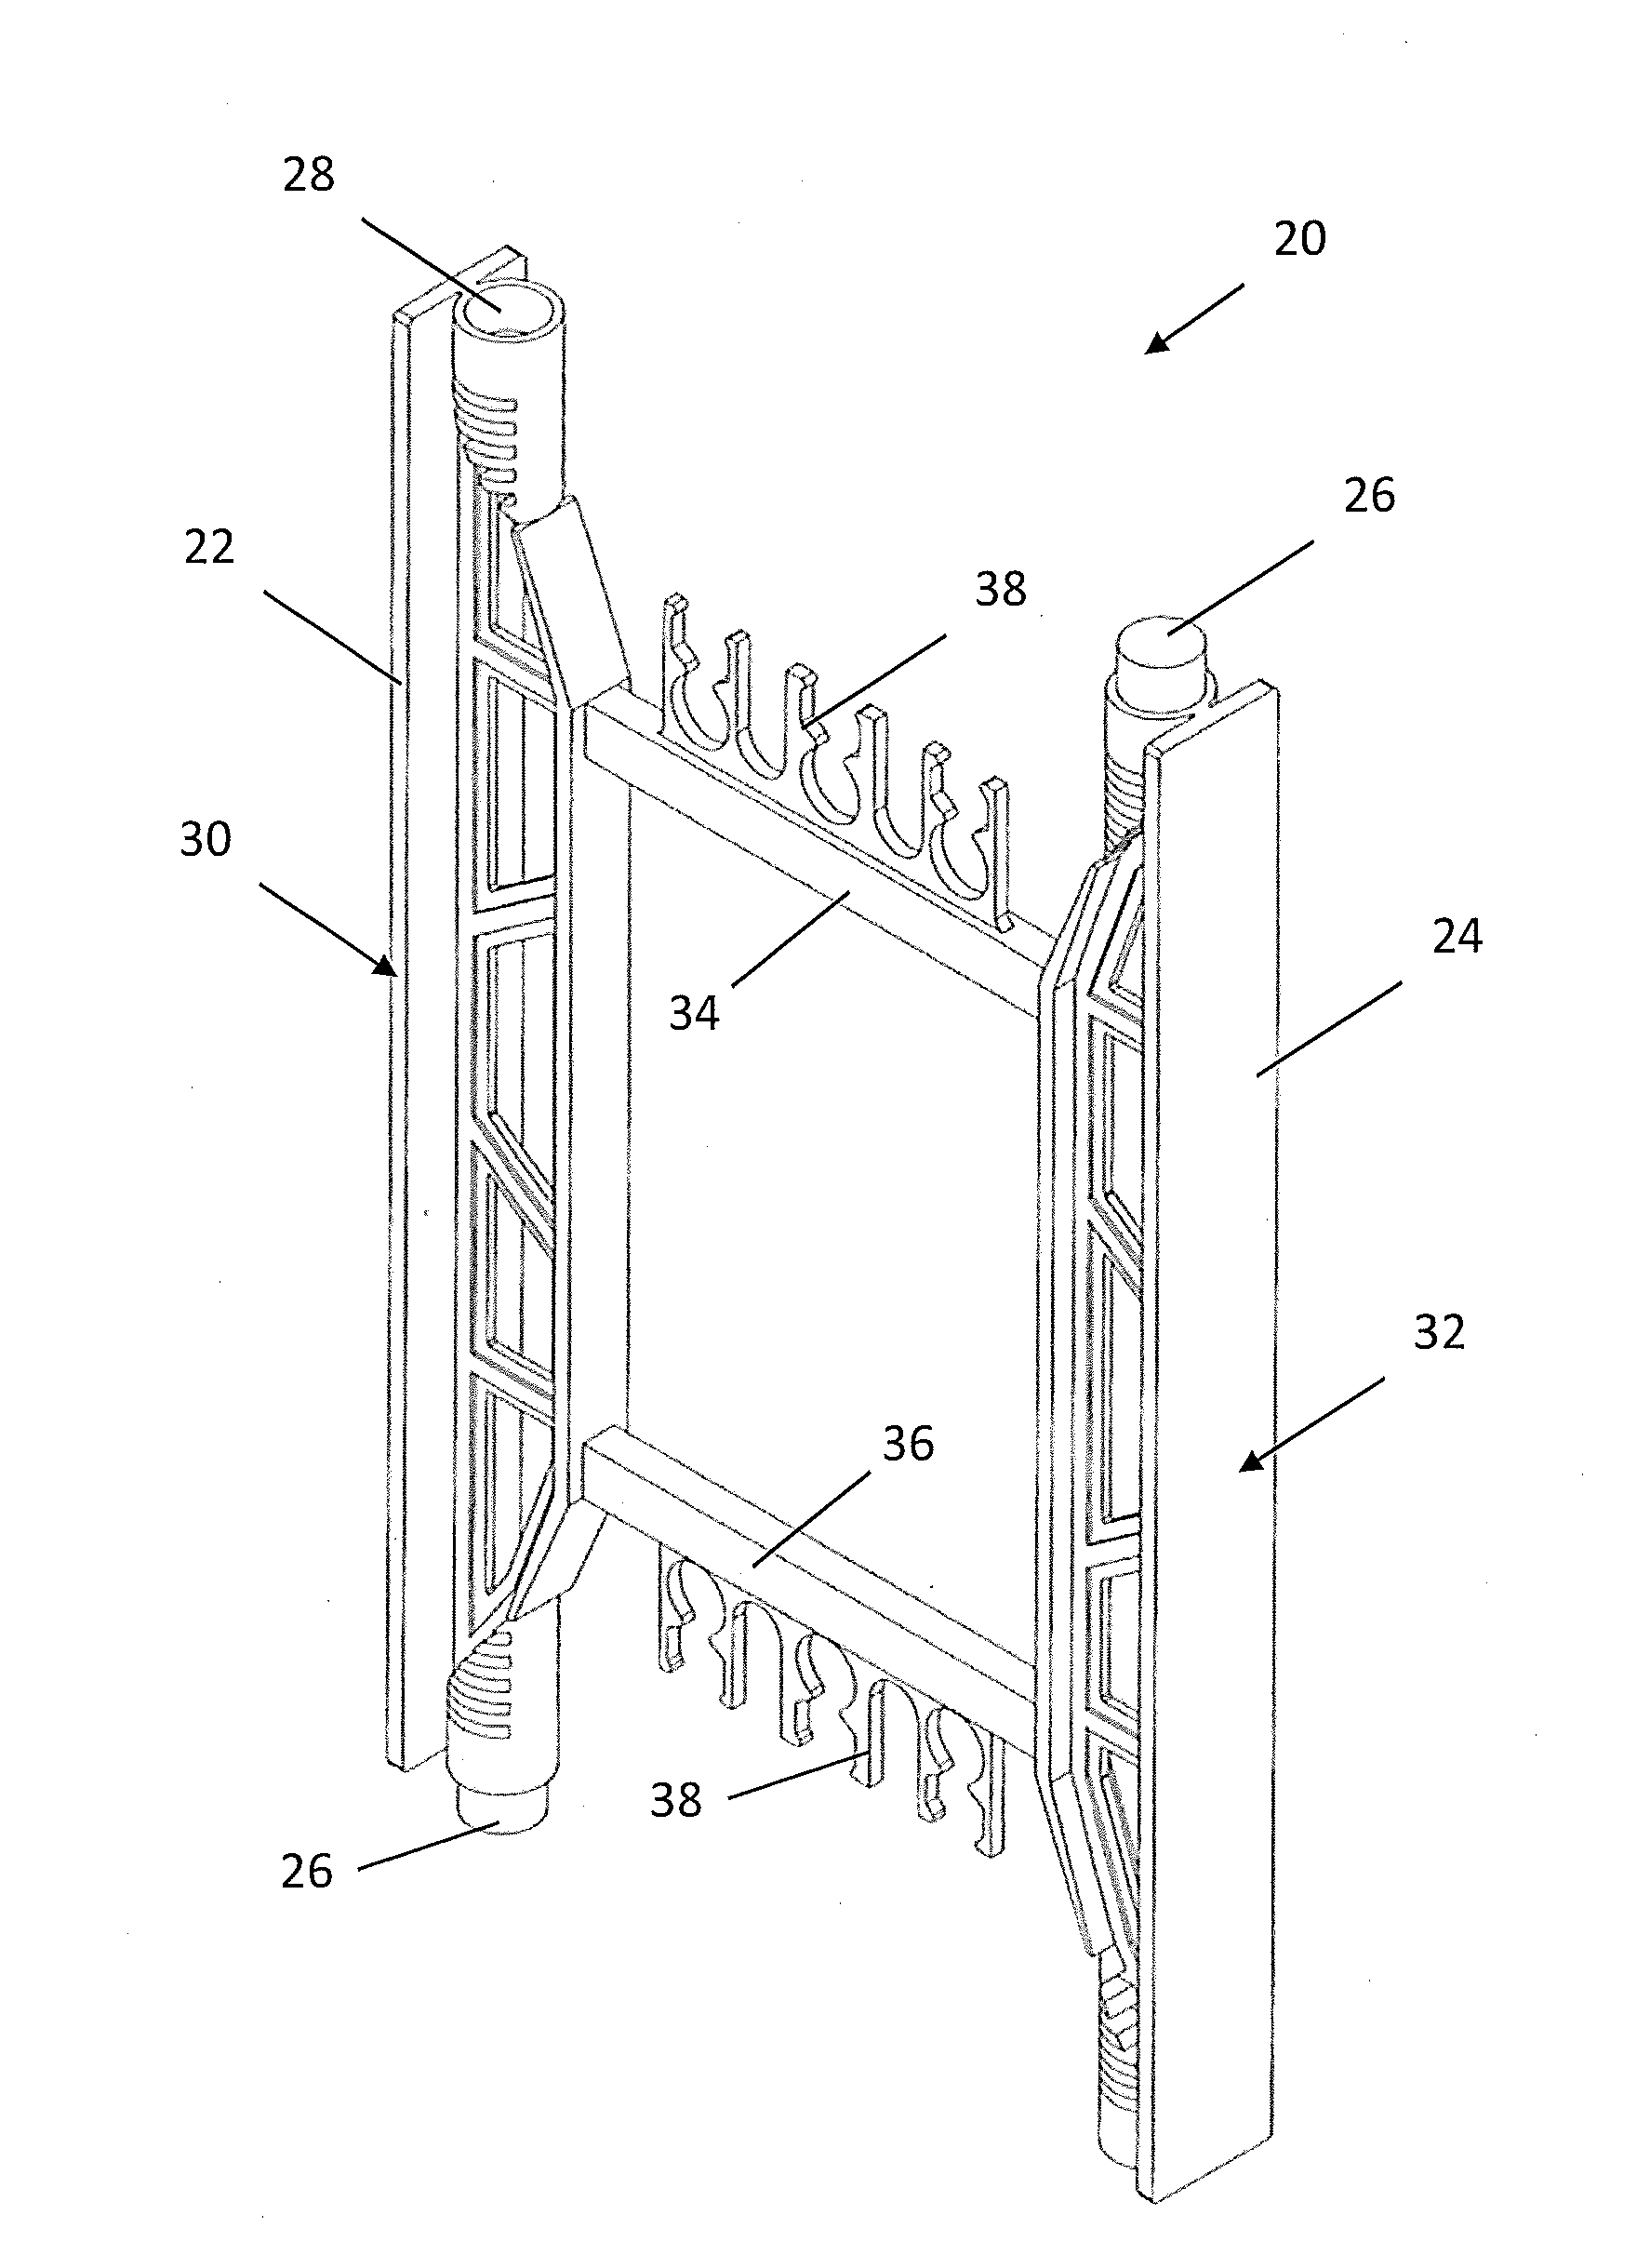 Interlocking web for insulated concrete forms